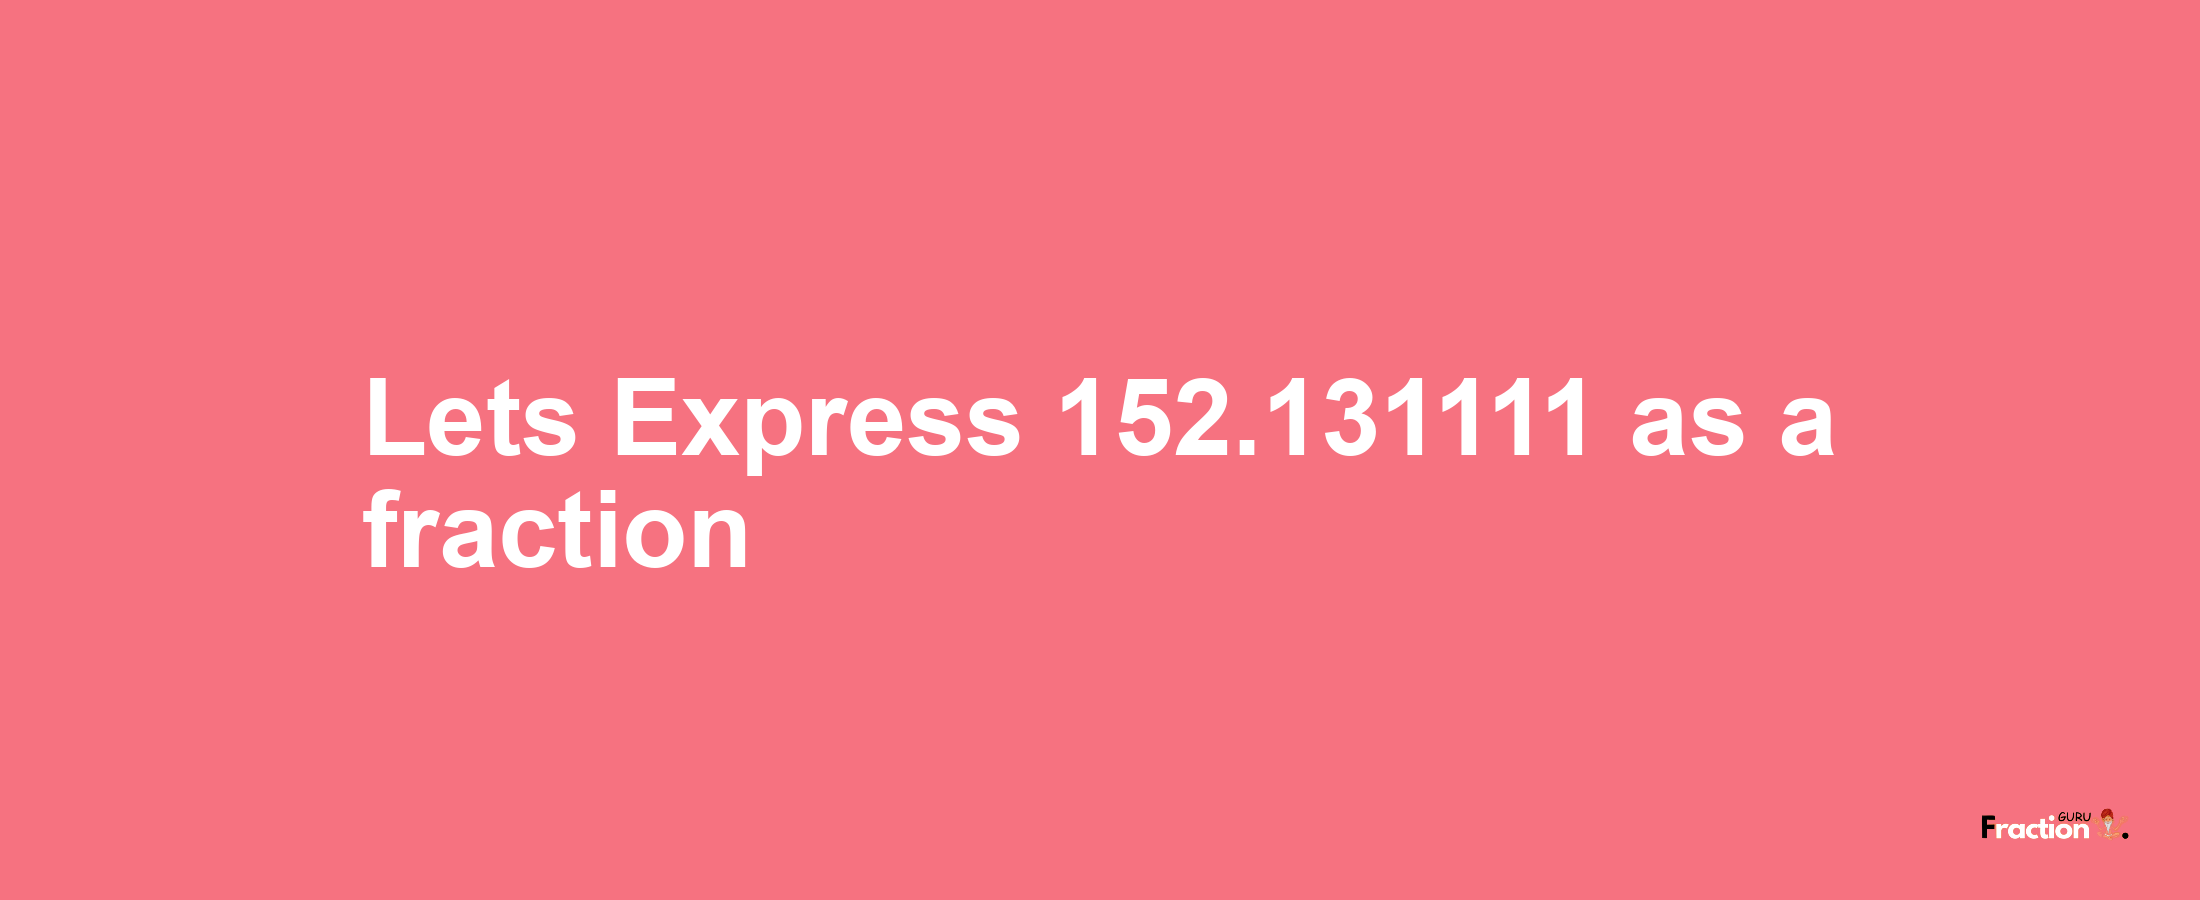 Lets Express 152.131111 as afraction